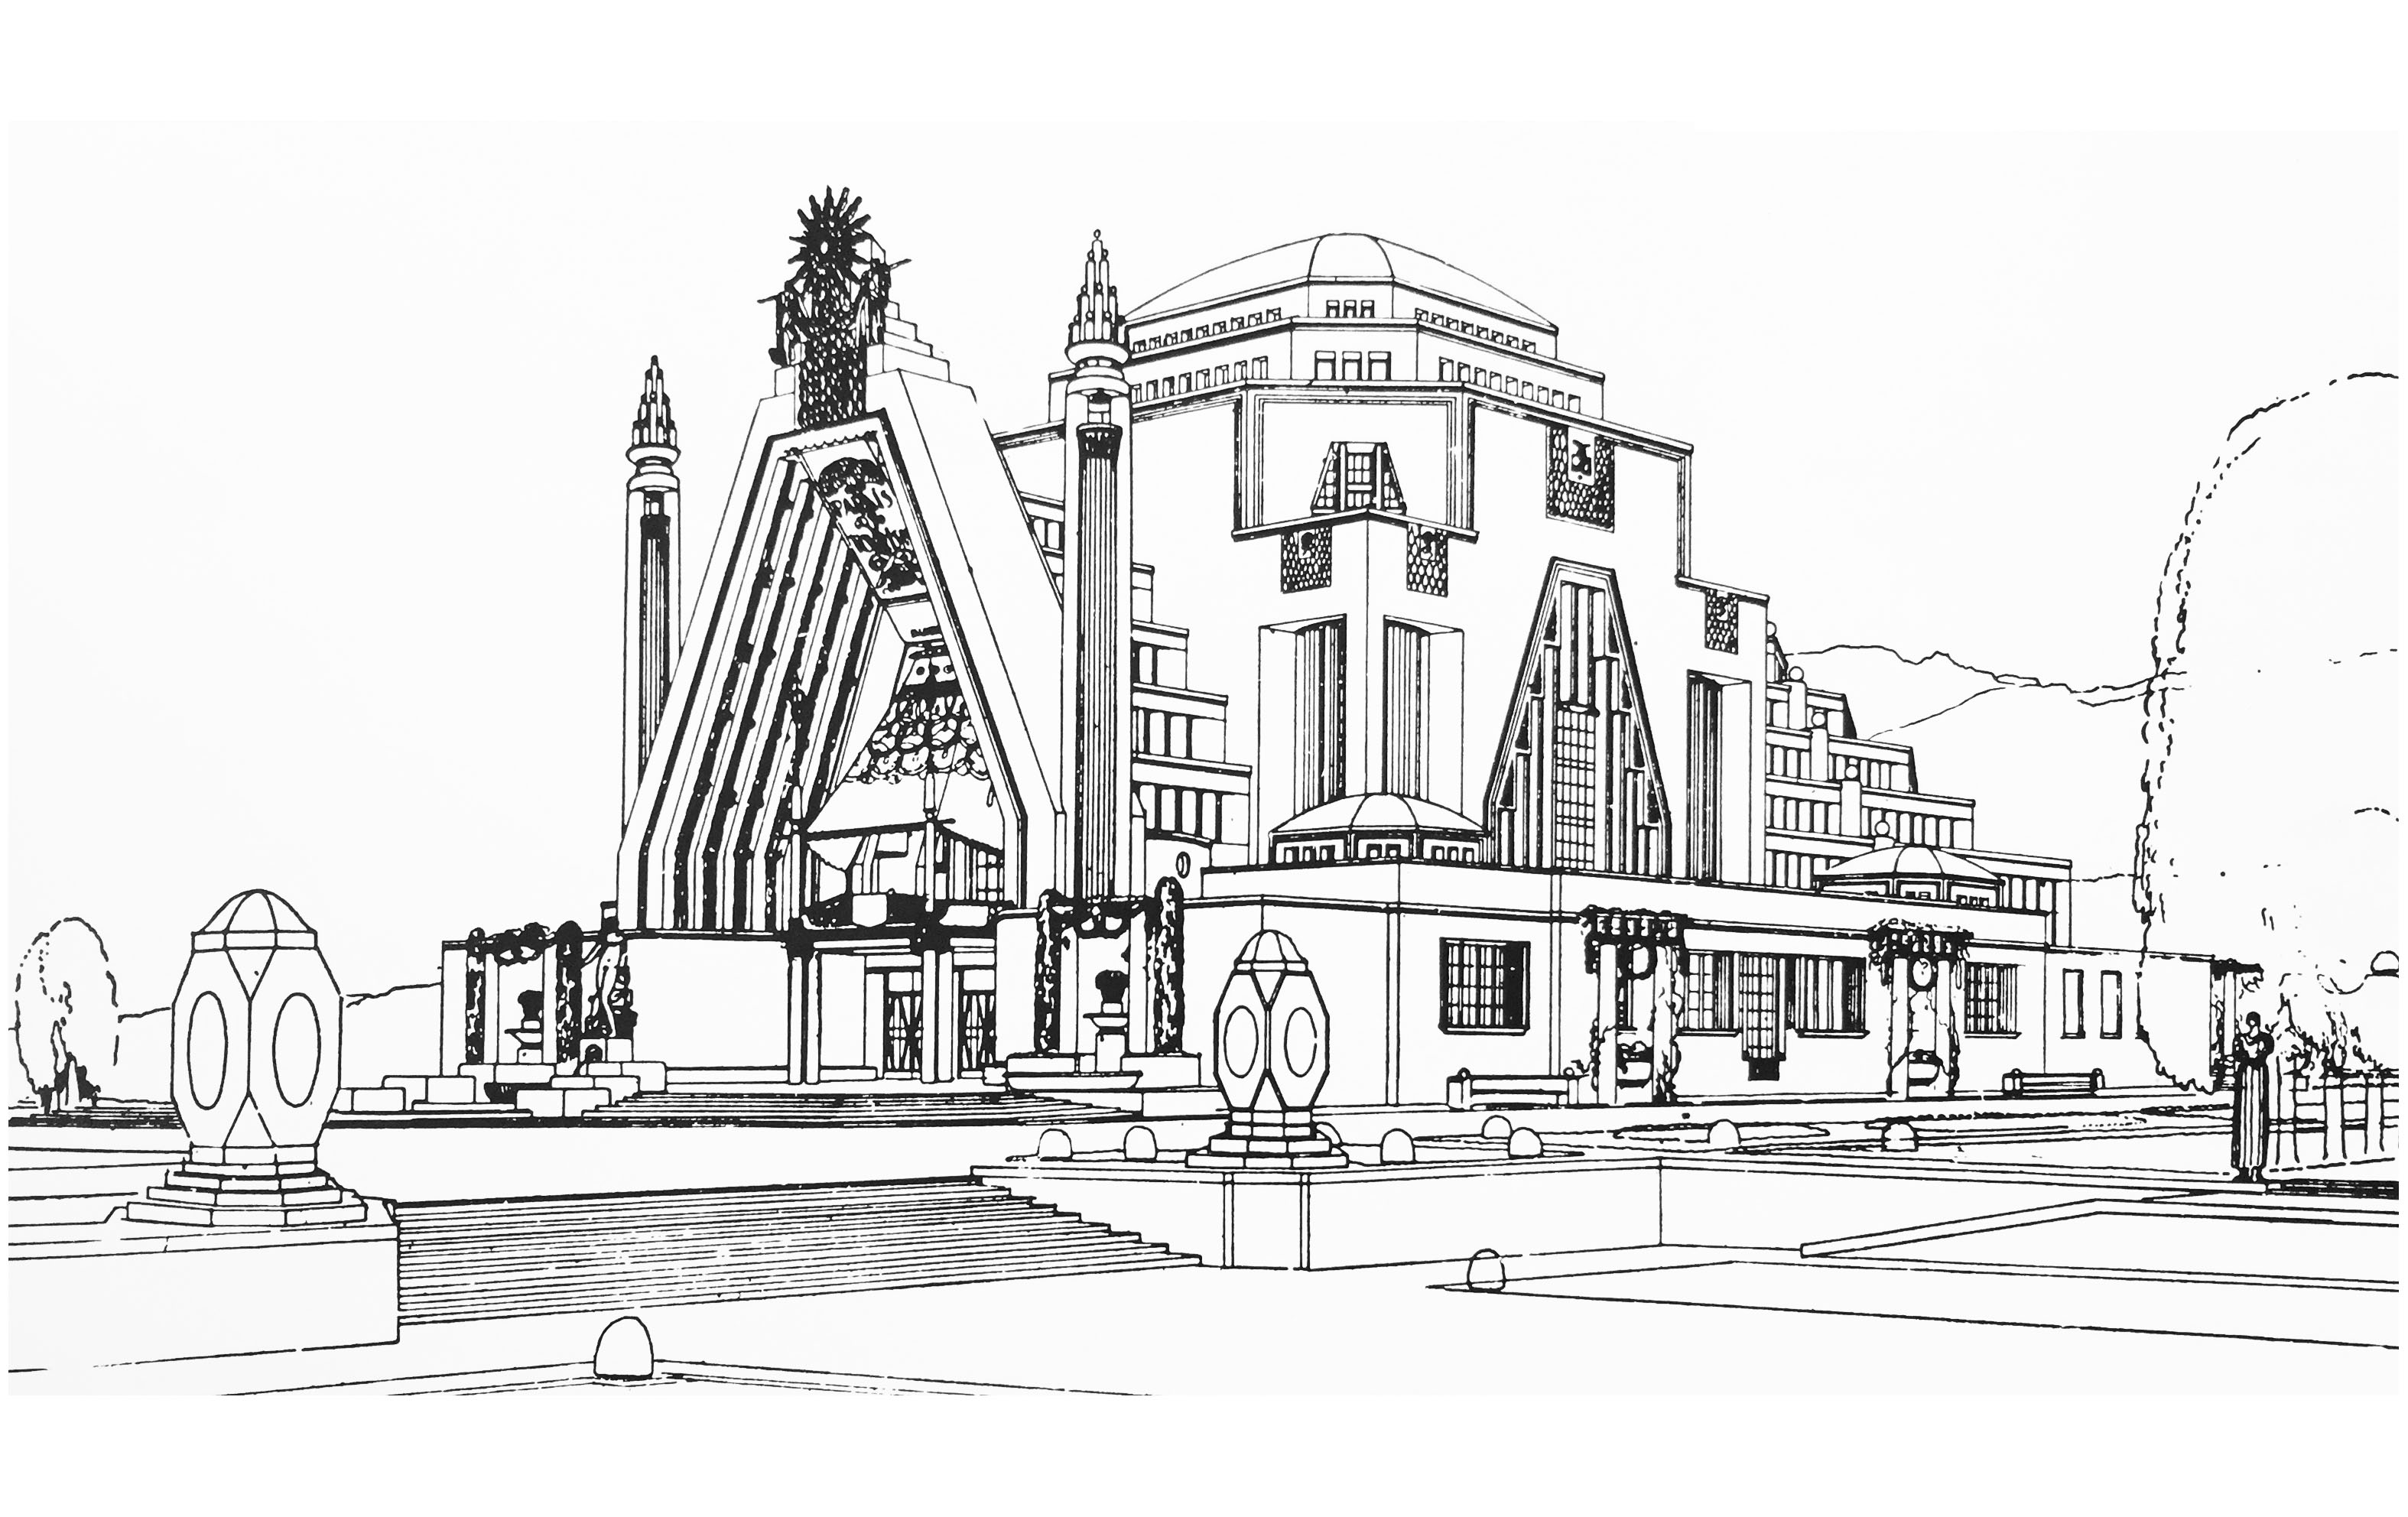 Drawing monument art deco france - 1925 - Image with : Building, France